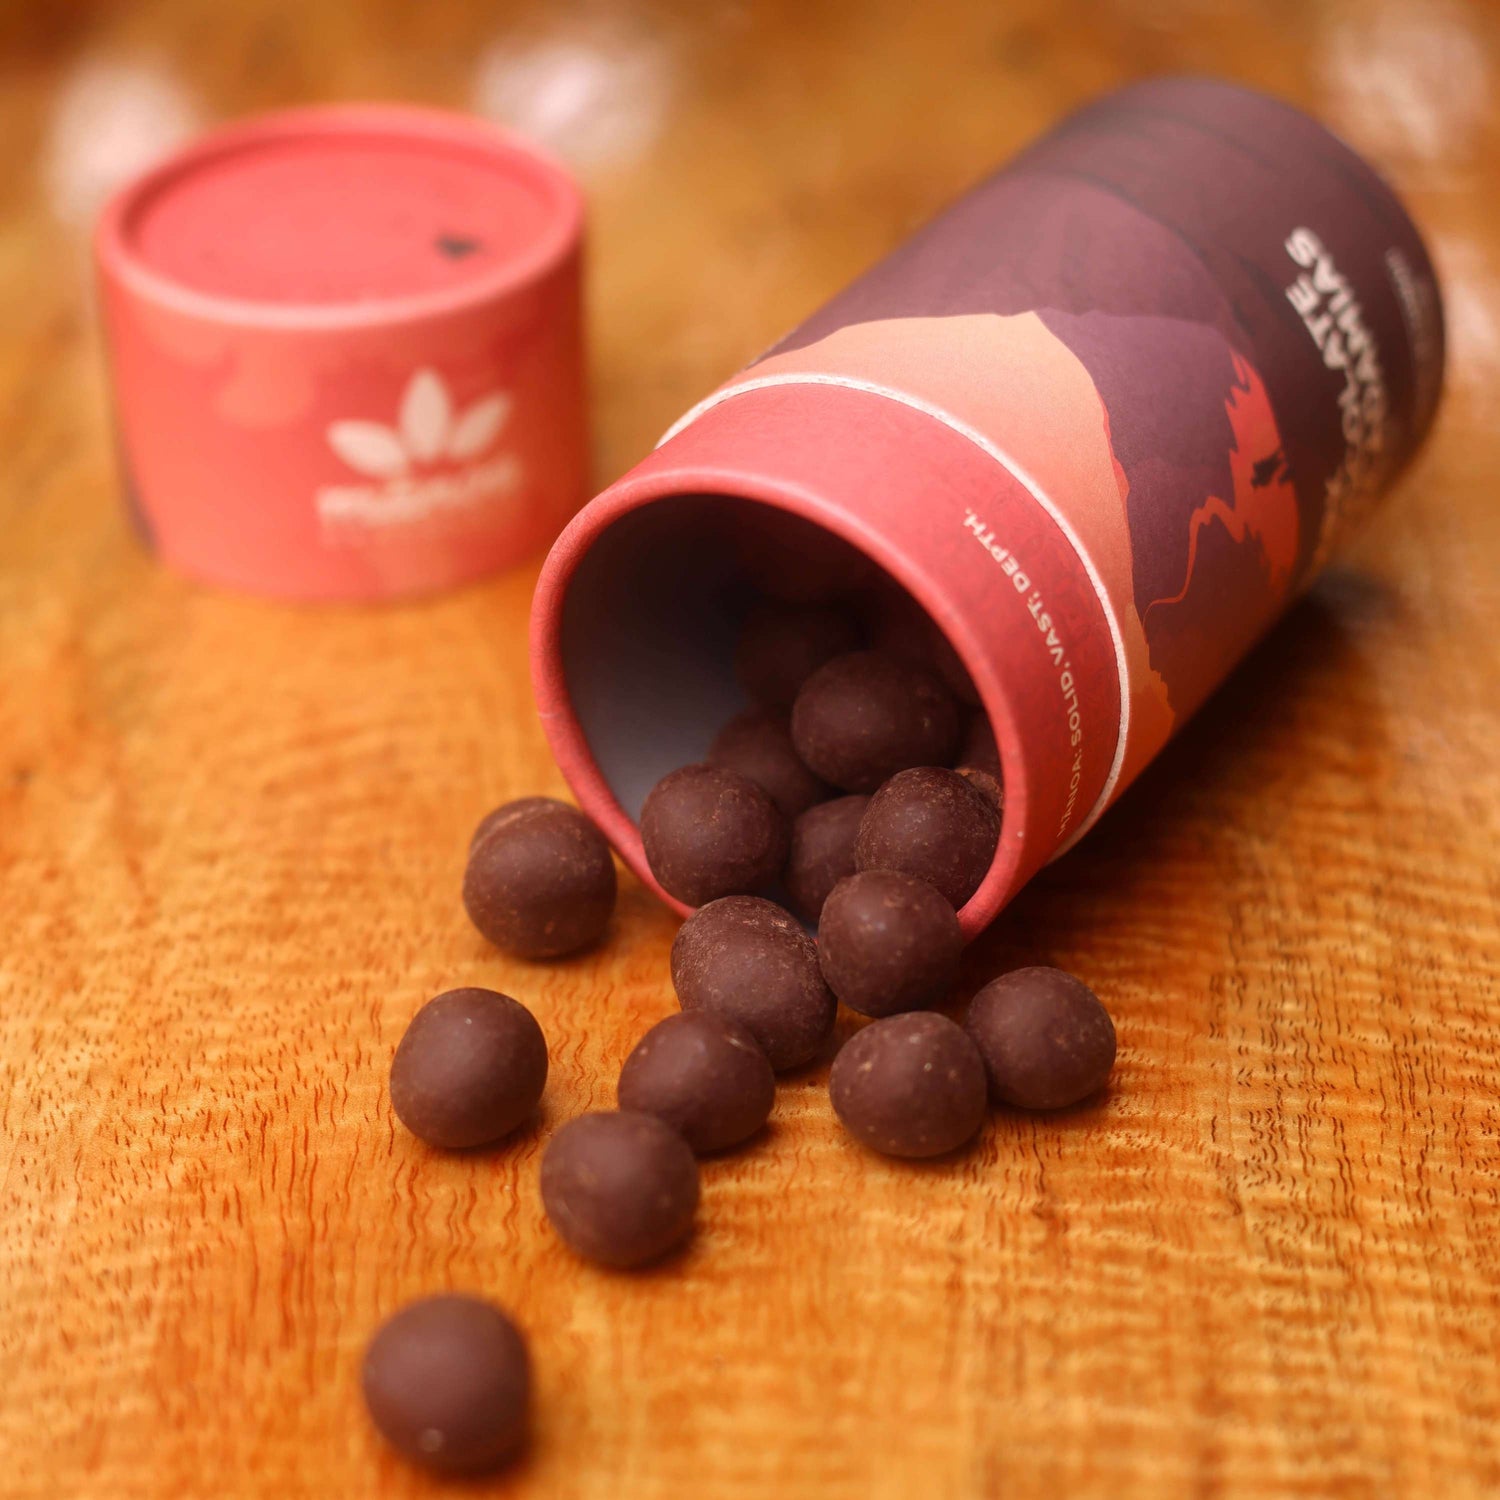 Image of tube with chocolate-covered macadamia nuts spilling out onto table